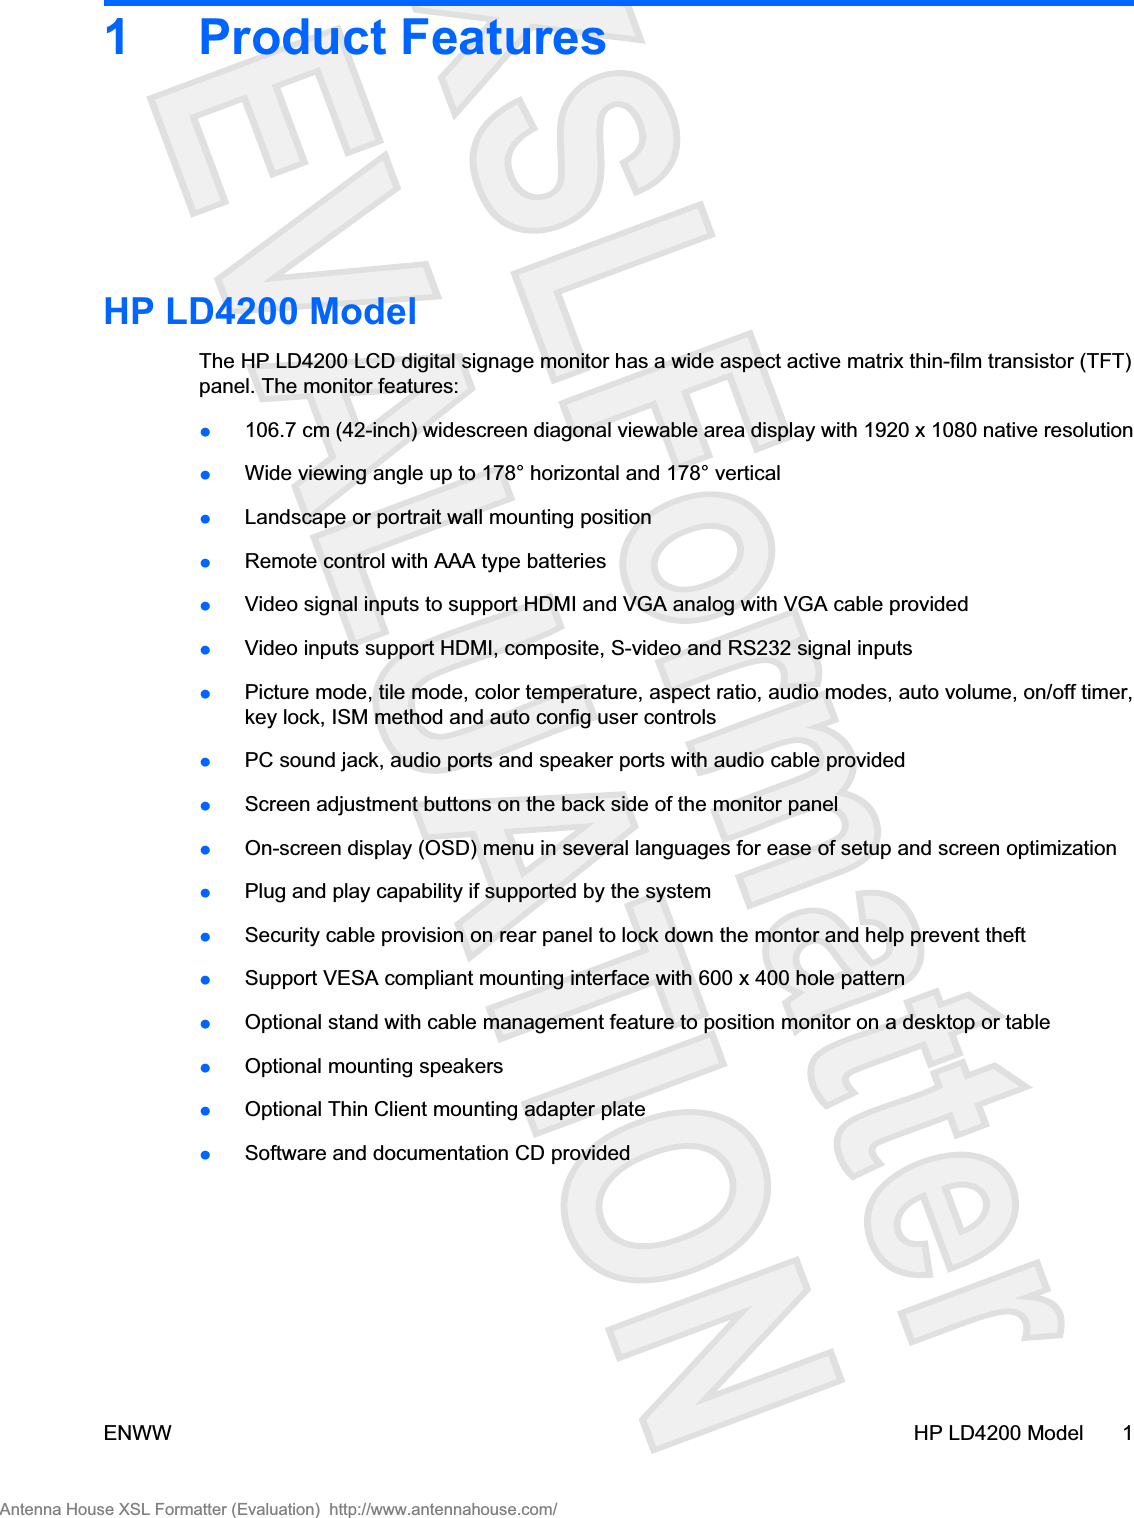 1 Product FeaturesHP LD4200 ModelThe HP LD4200 LCD digital signage monitor has a wide aspect active matrix thin-film transistor (TFT)panel. The monitor features:ł106.7 cm (42-inch) widescreen diagonal viewable area display with 1920 x 1080 native resolutionłWide viewing angle up to 178° horizontal and 178° verticalłLandscape or portrait wall mounting positionłRemote control with AAA type batteriesłVideo signal inputs to support HDMI and VGA analog with VGA cable providedłVideo inputs support HDMI, composite, S-video and RS232 signal inputsłPicture mode, tile mode, color temperature, aspect ratio, audio modes, auto volume, on/off timer,key lock, ISM method and auto config user controlsłPC sound jack, audio ports and speaker ports with audio cable providedłScreen adjustment buttons on the back side of the monitor panelłOn-screen display (OSD) menu in several languages for ease of setup and screen optimizationłPlug and play capability if supported by the systemłSecurity cable provision on rear panel to lock down the montor and help prevent theftłSupport VESA compliant mounting interface with 600 x 400 hole patternłOptional stand with cable management feature to position monitor on a desktop or tablełOptional mounting speakersłOptional Thin Client mounting adapter platełSoftware and documentation CD providedENWW HP LD4200 Model 1Antenna House XSL Formatter (Evaluation)  http://www.antennahouse.com/